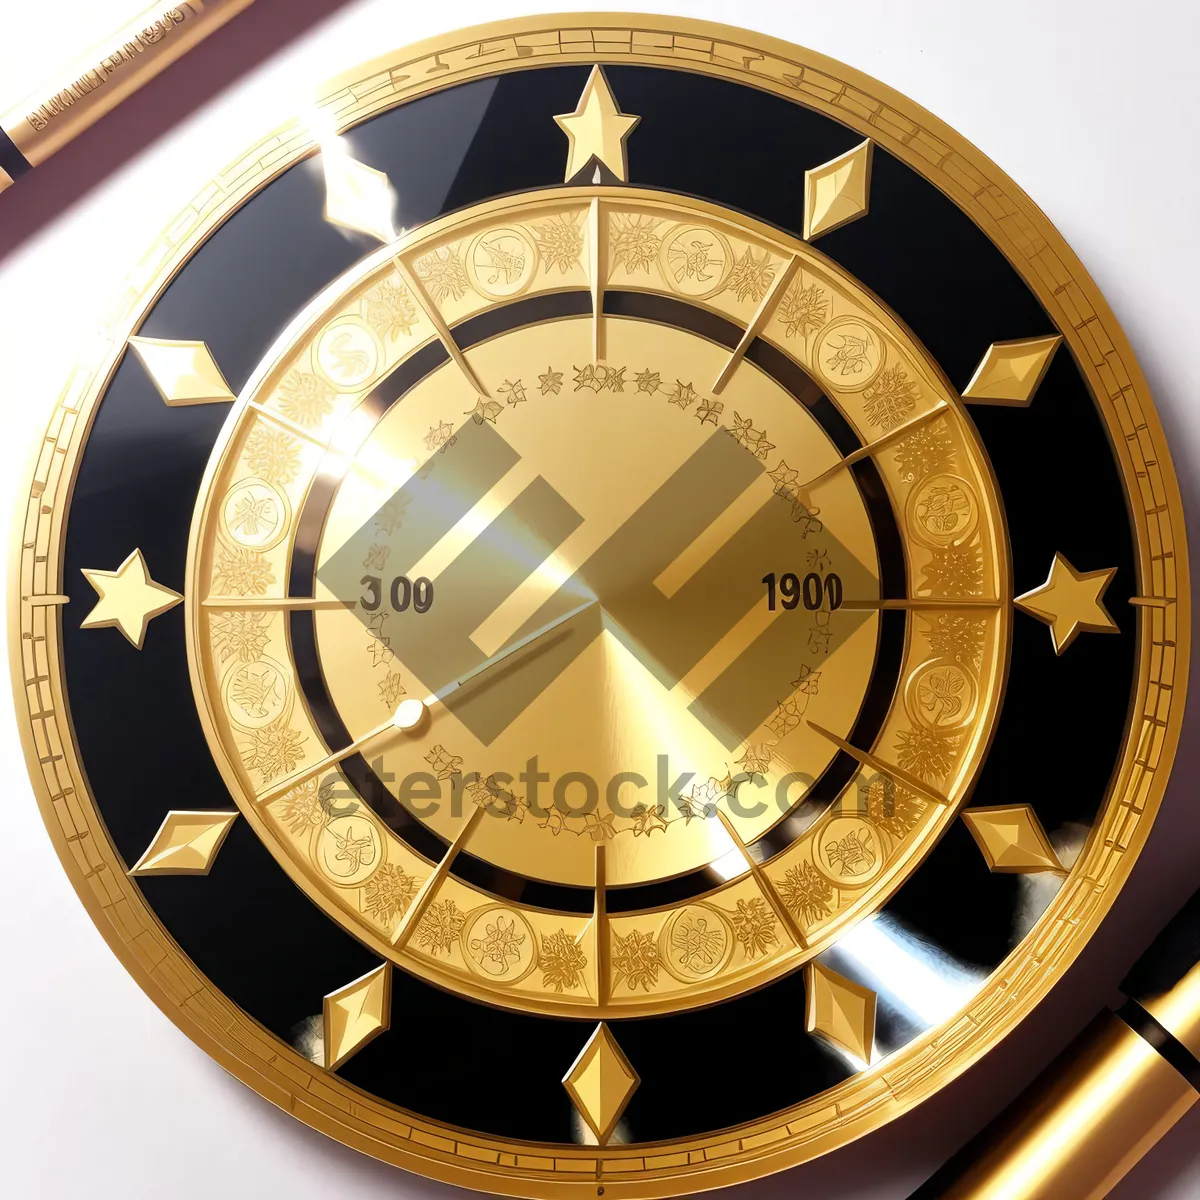 Picture of Vintage Analog Clock with Minute and Hour Hands